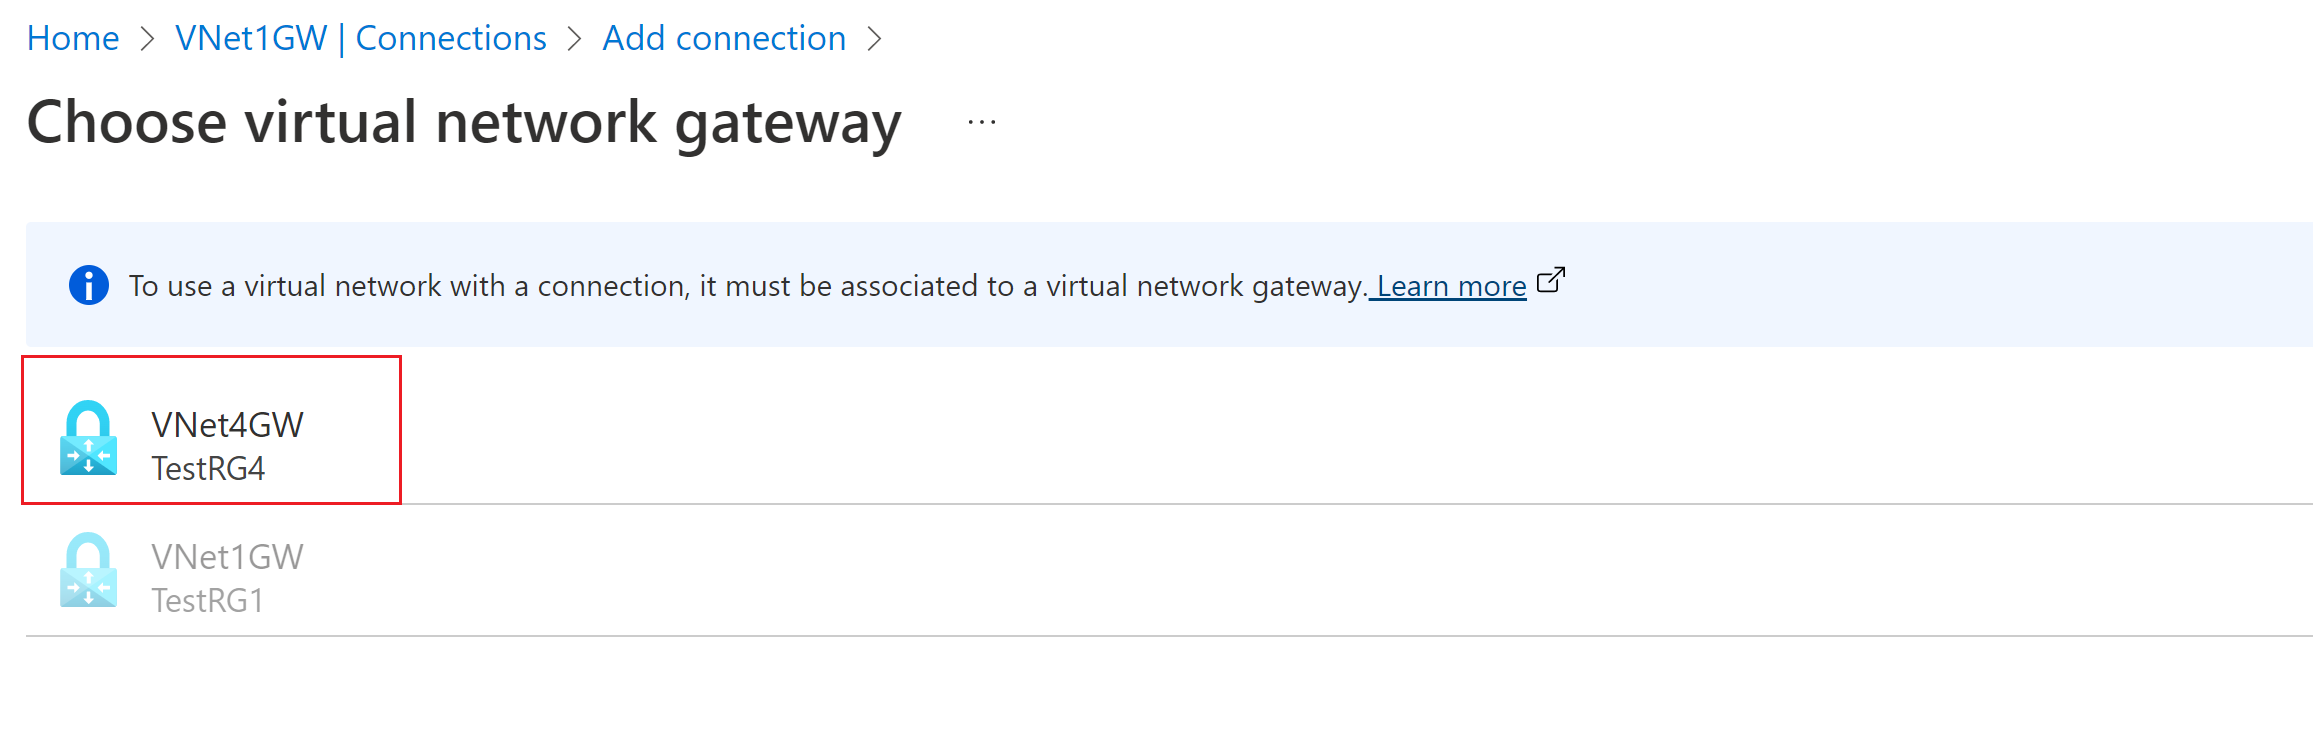 Screenshot showing Choose a virtual network gateway page with another gateway selected.